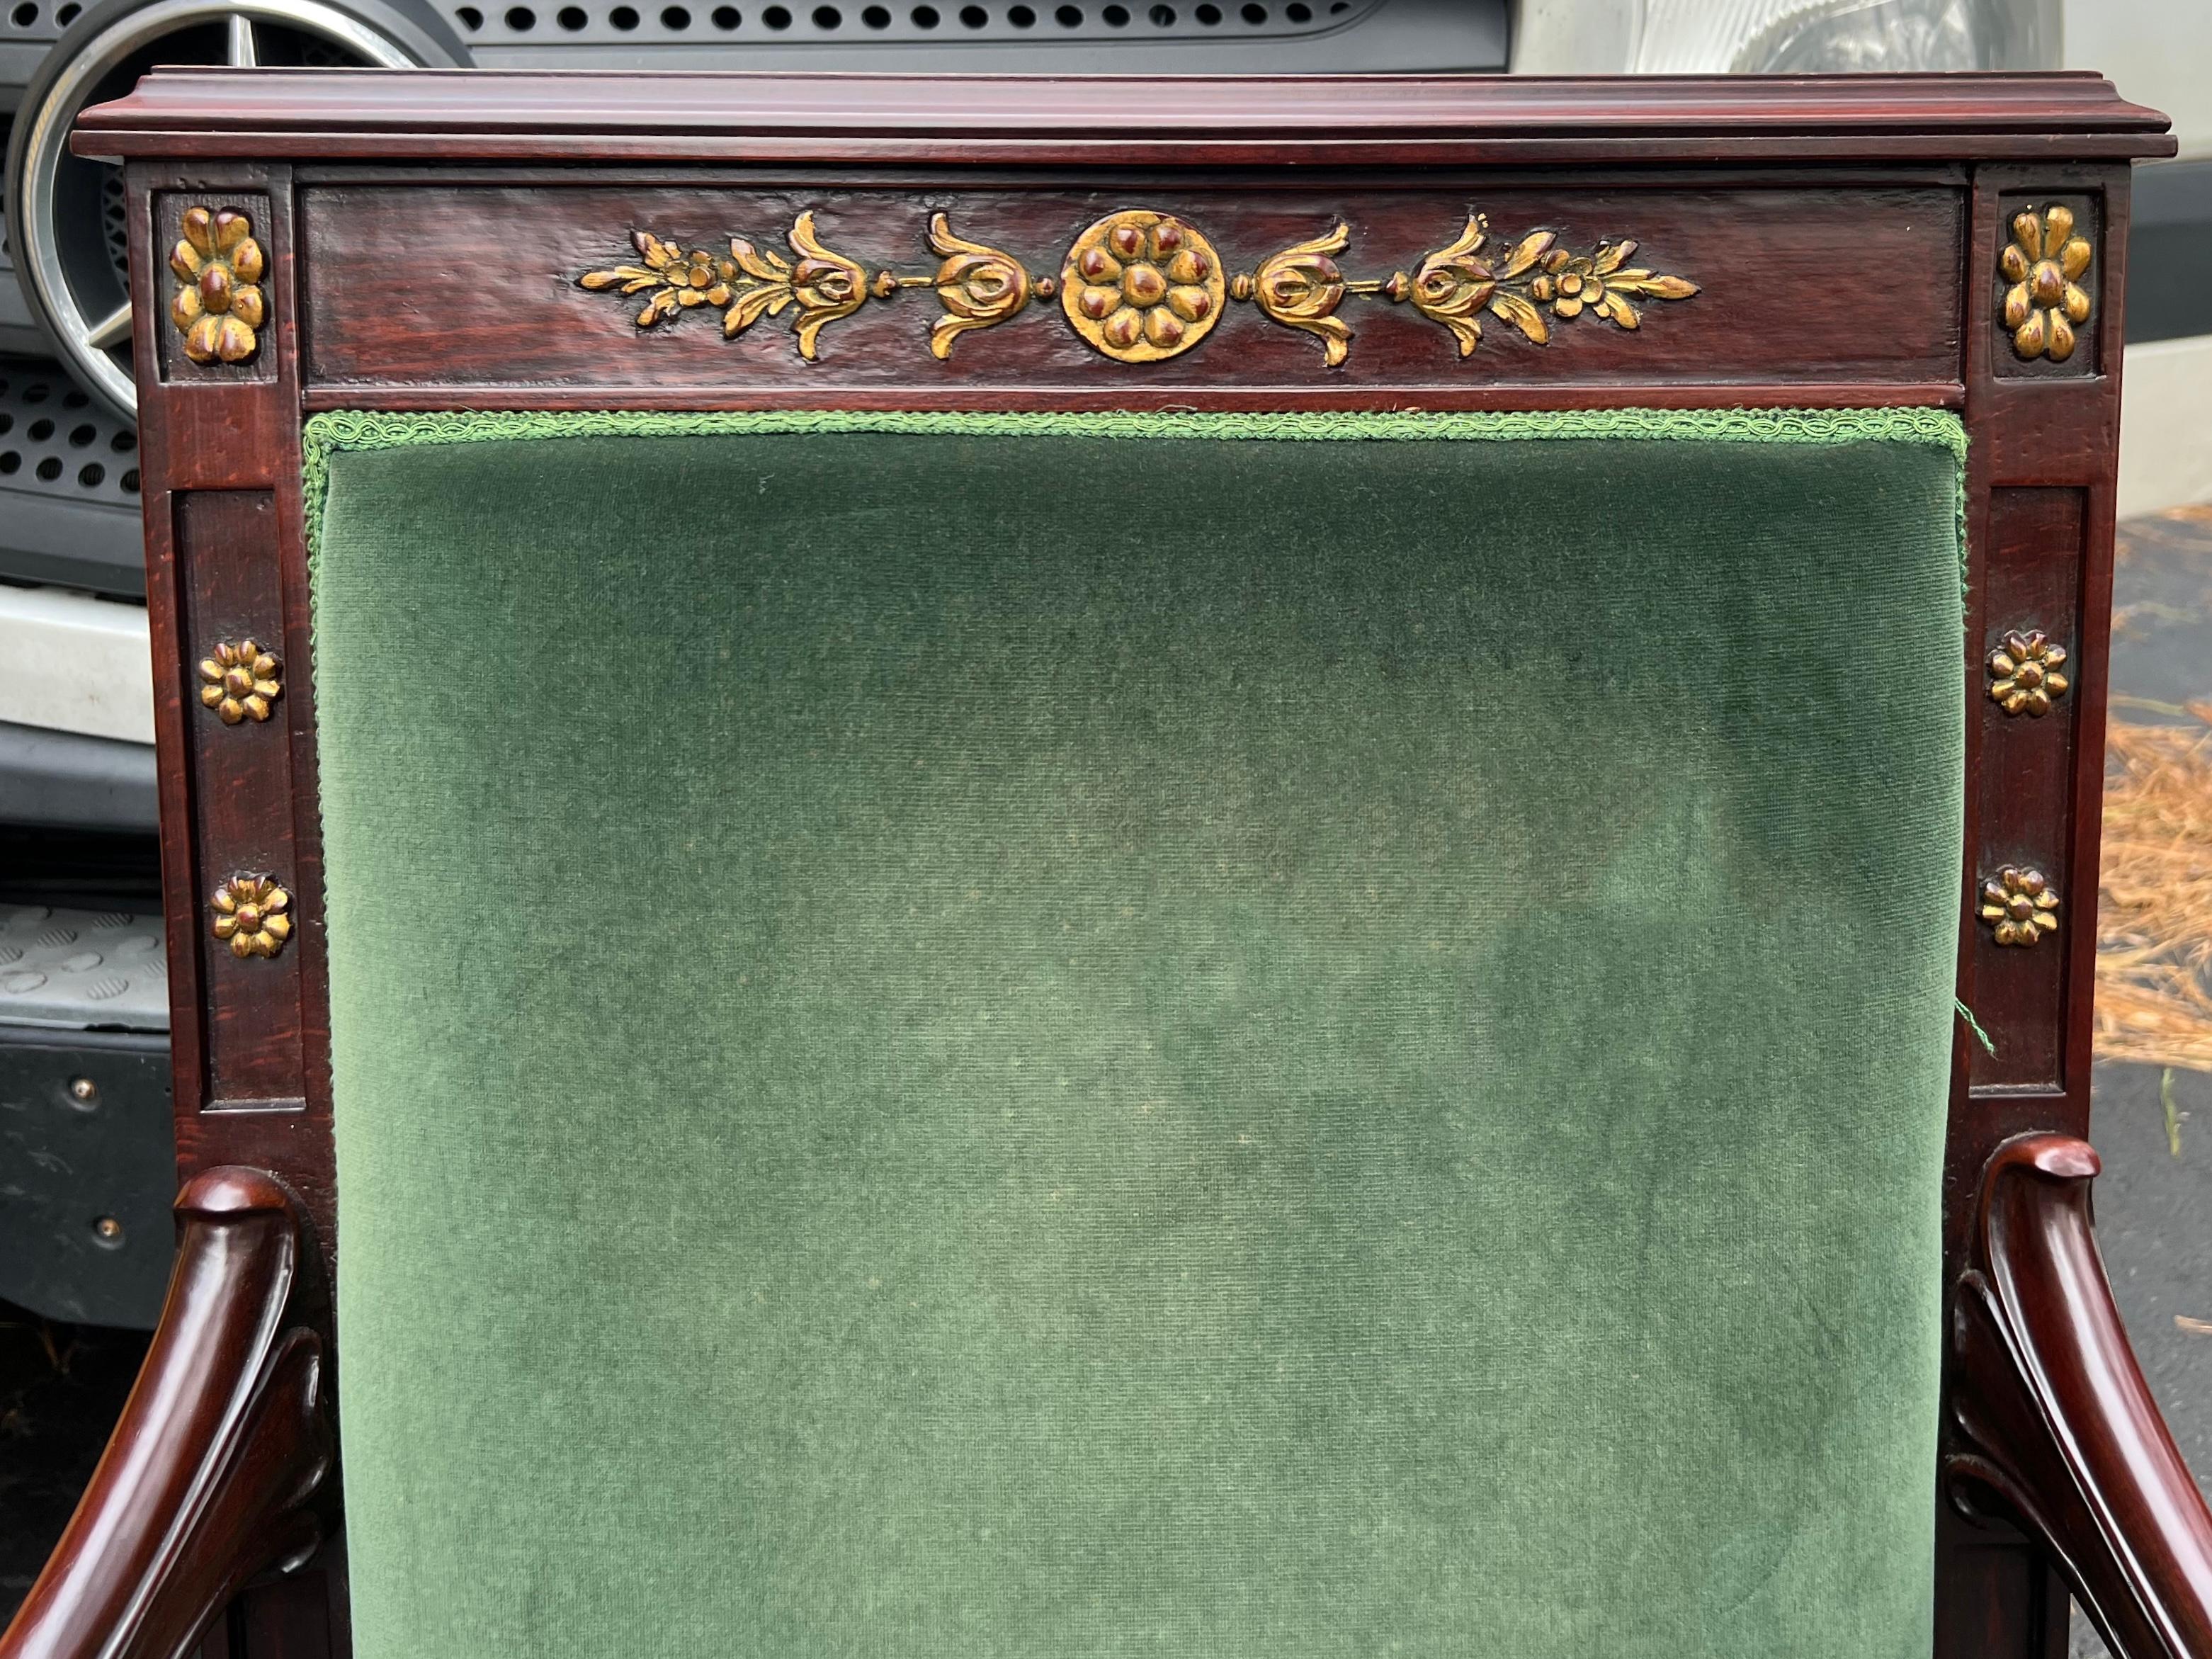 20th-C. Fruitwood and Giltwood Italian Bergere Chairs in Green Velvet, Pair For Sale 3